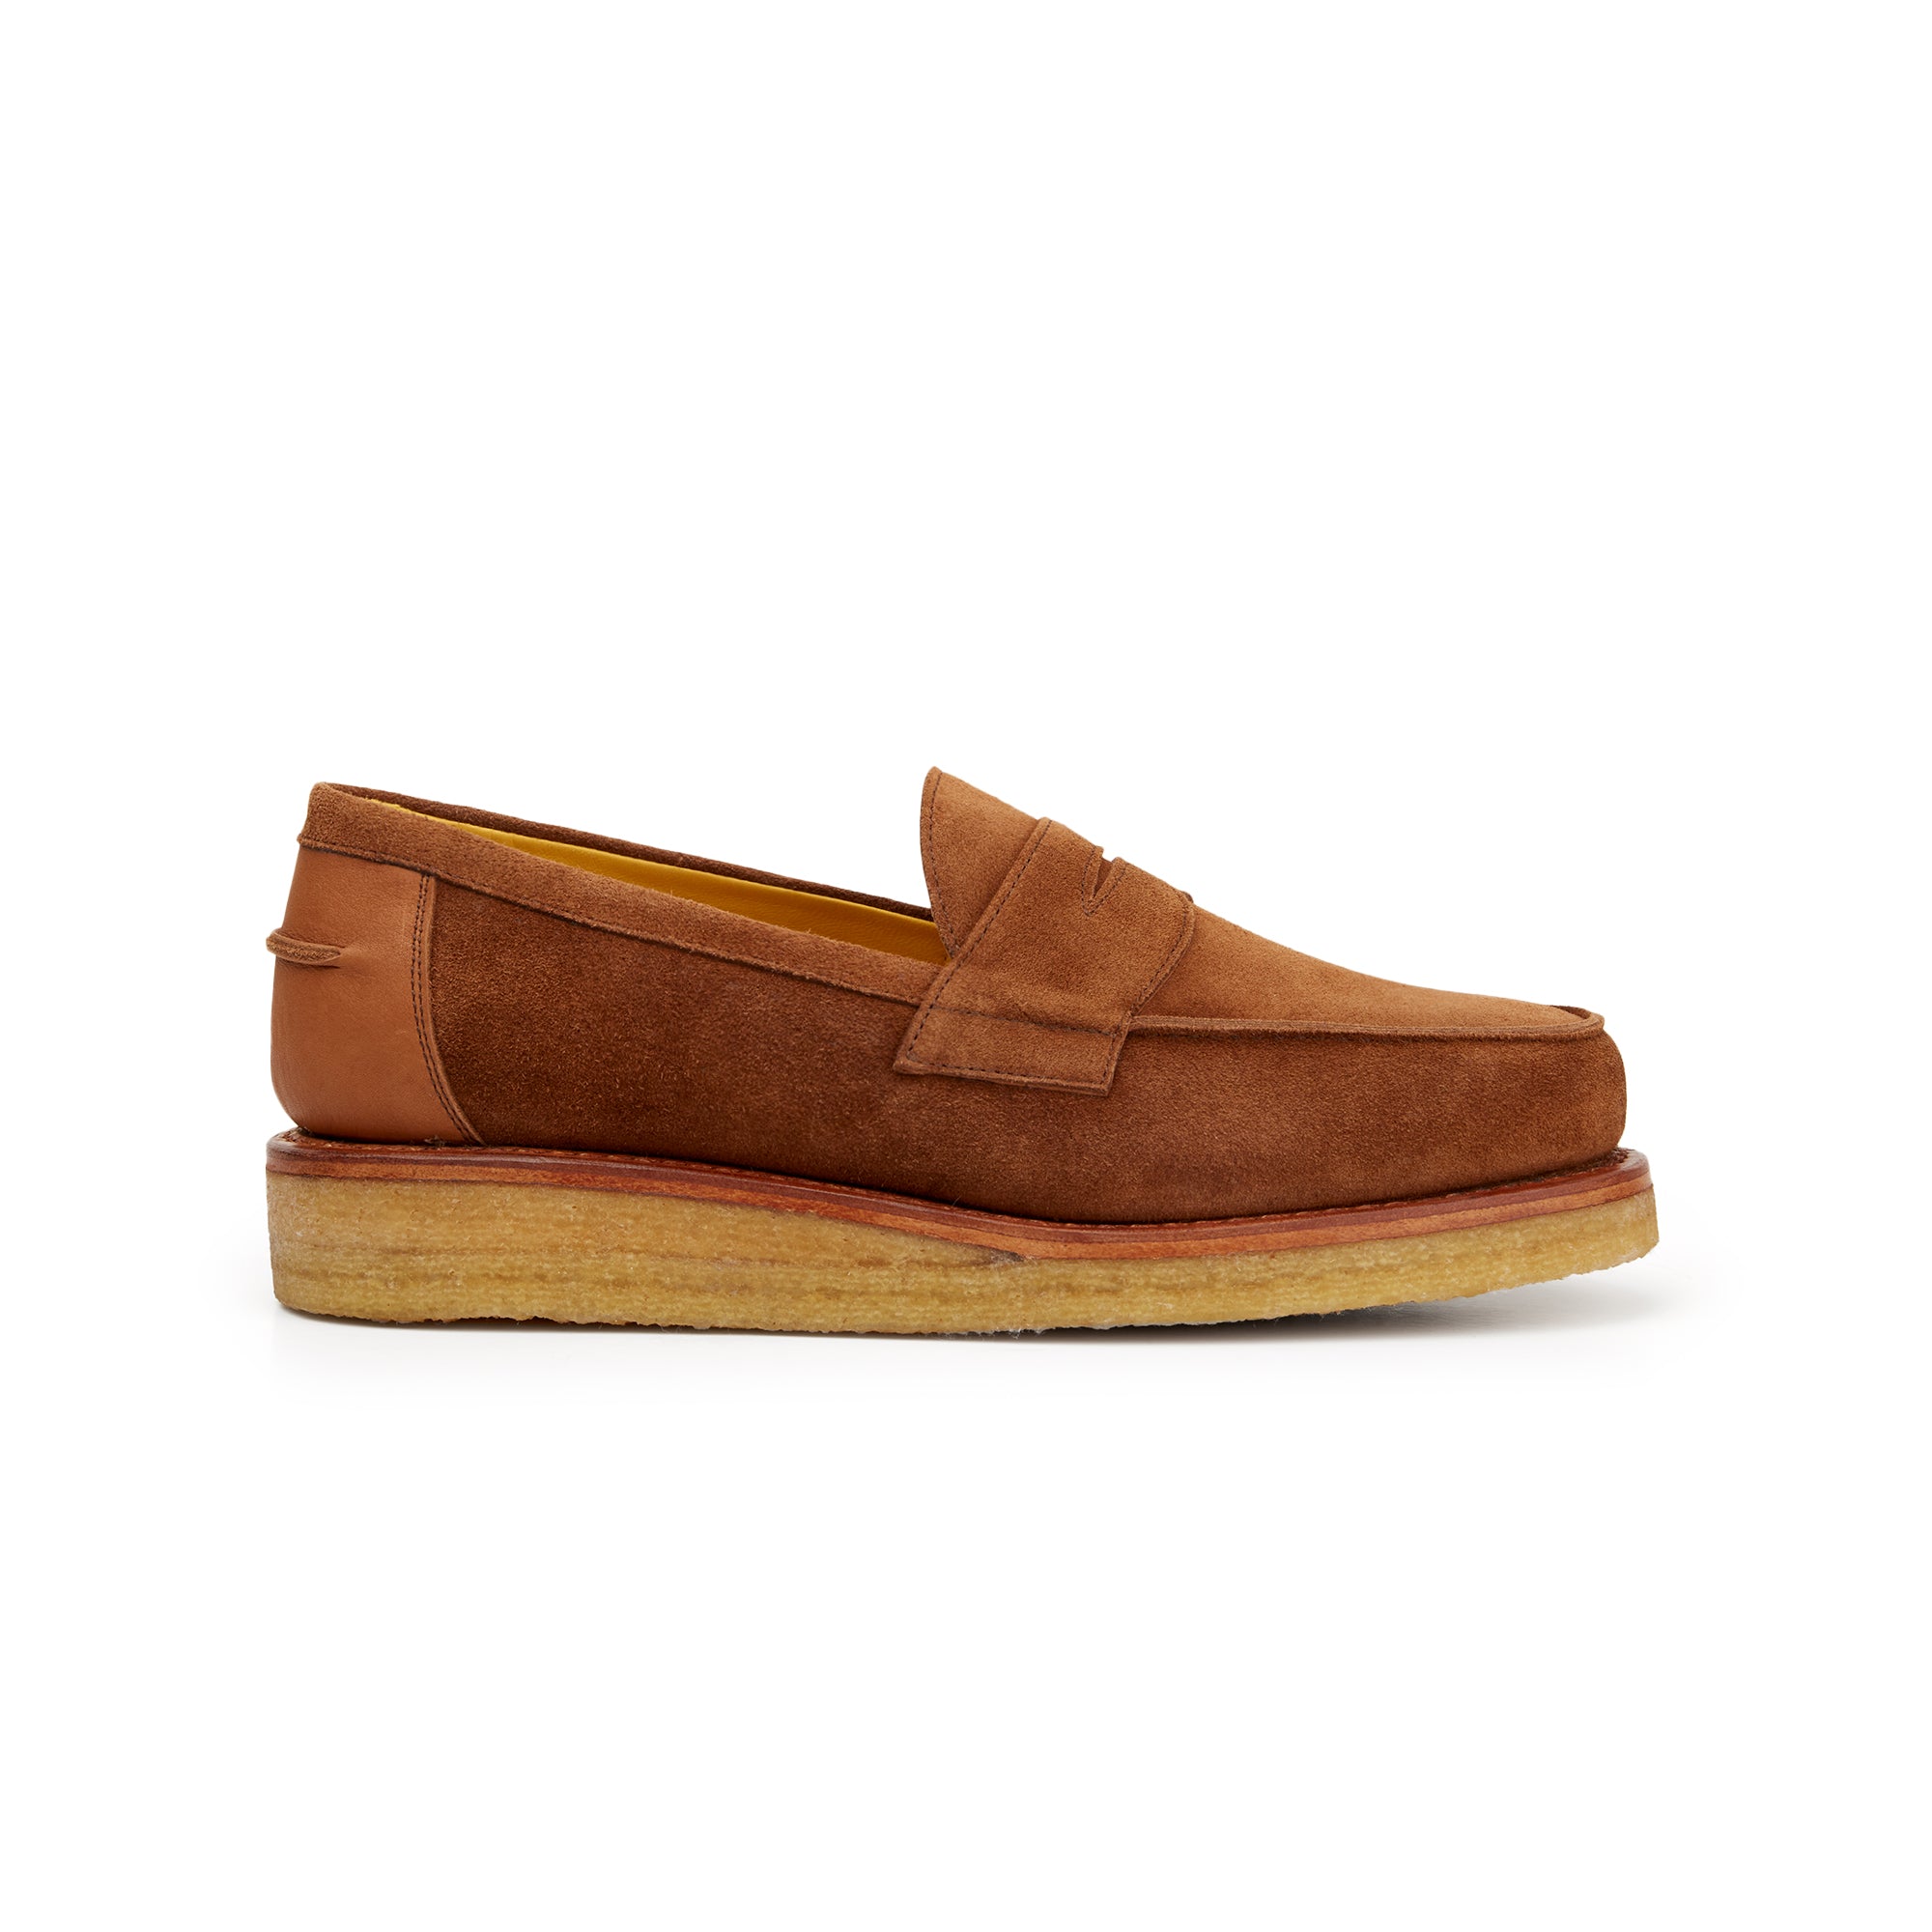 The Crepe Wedge Loafer, Exclusively for 3Sixteen